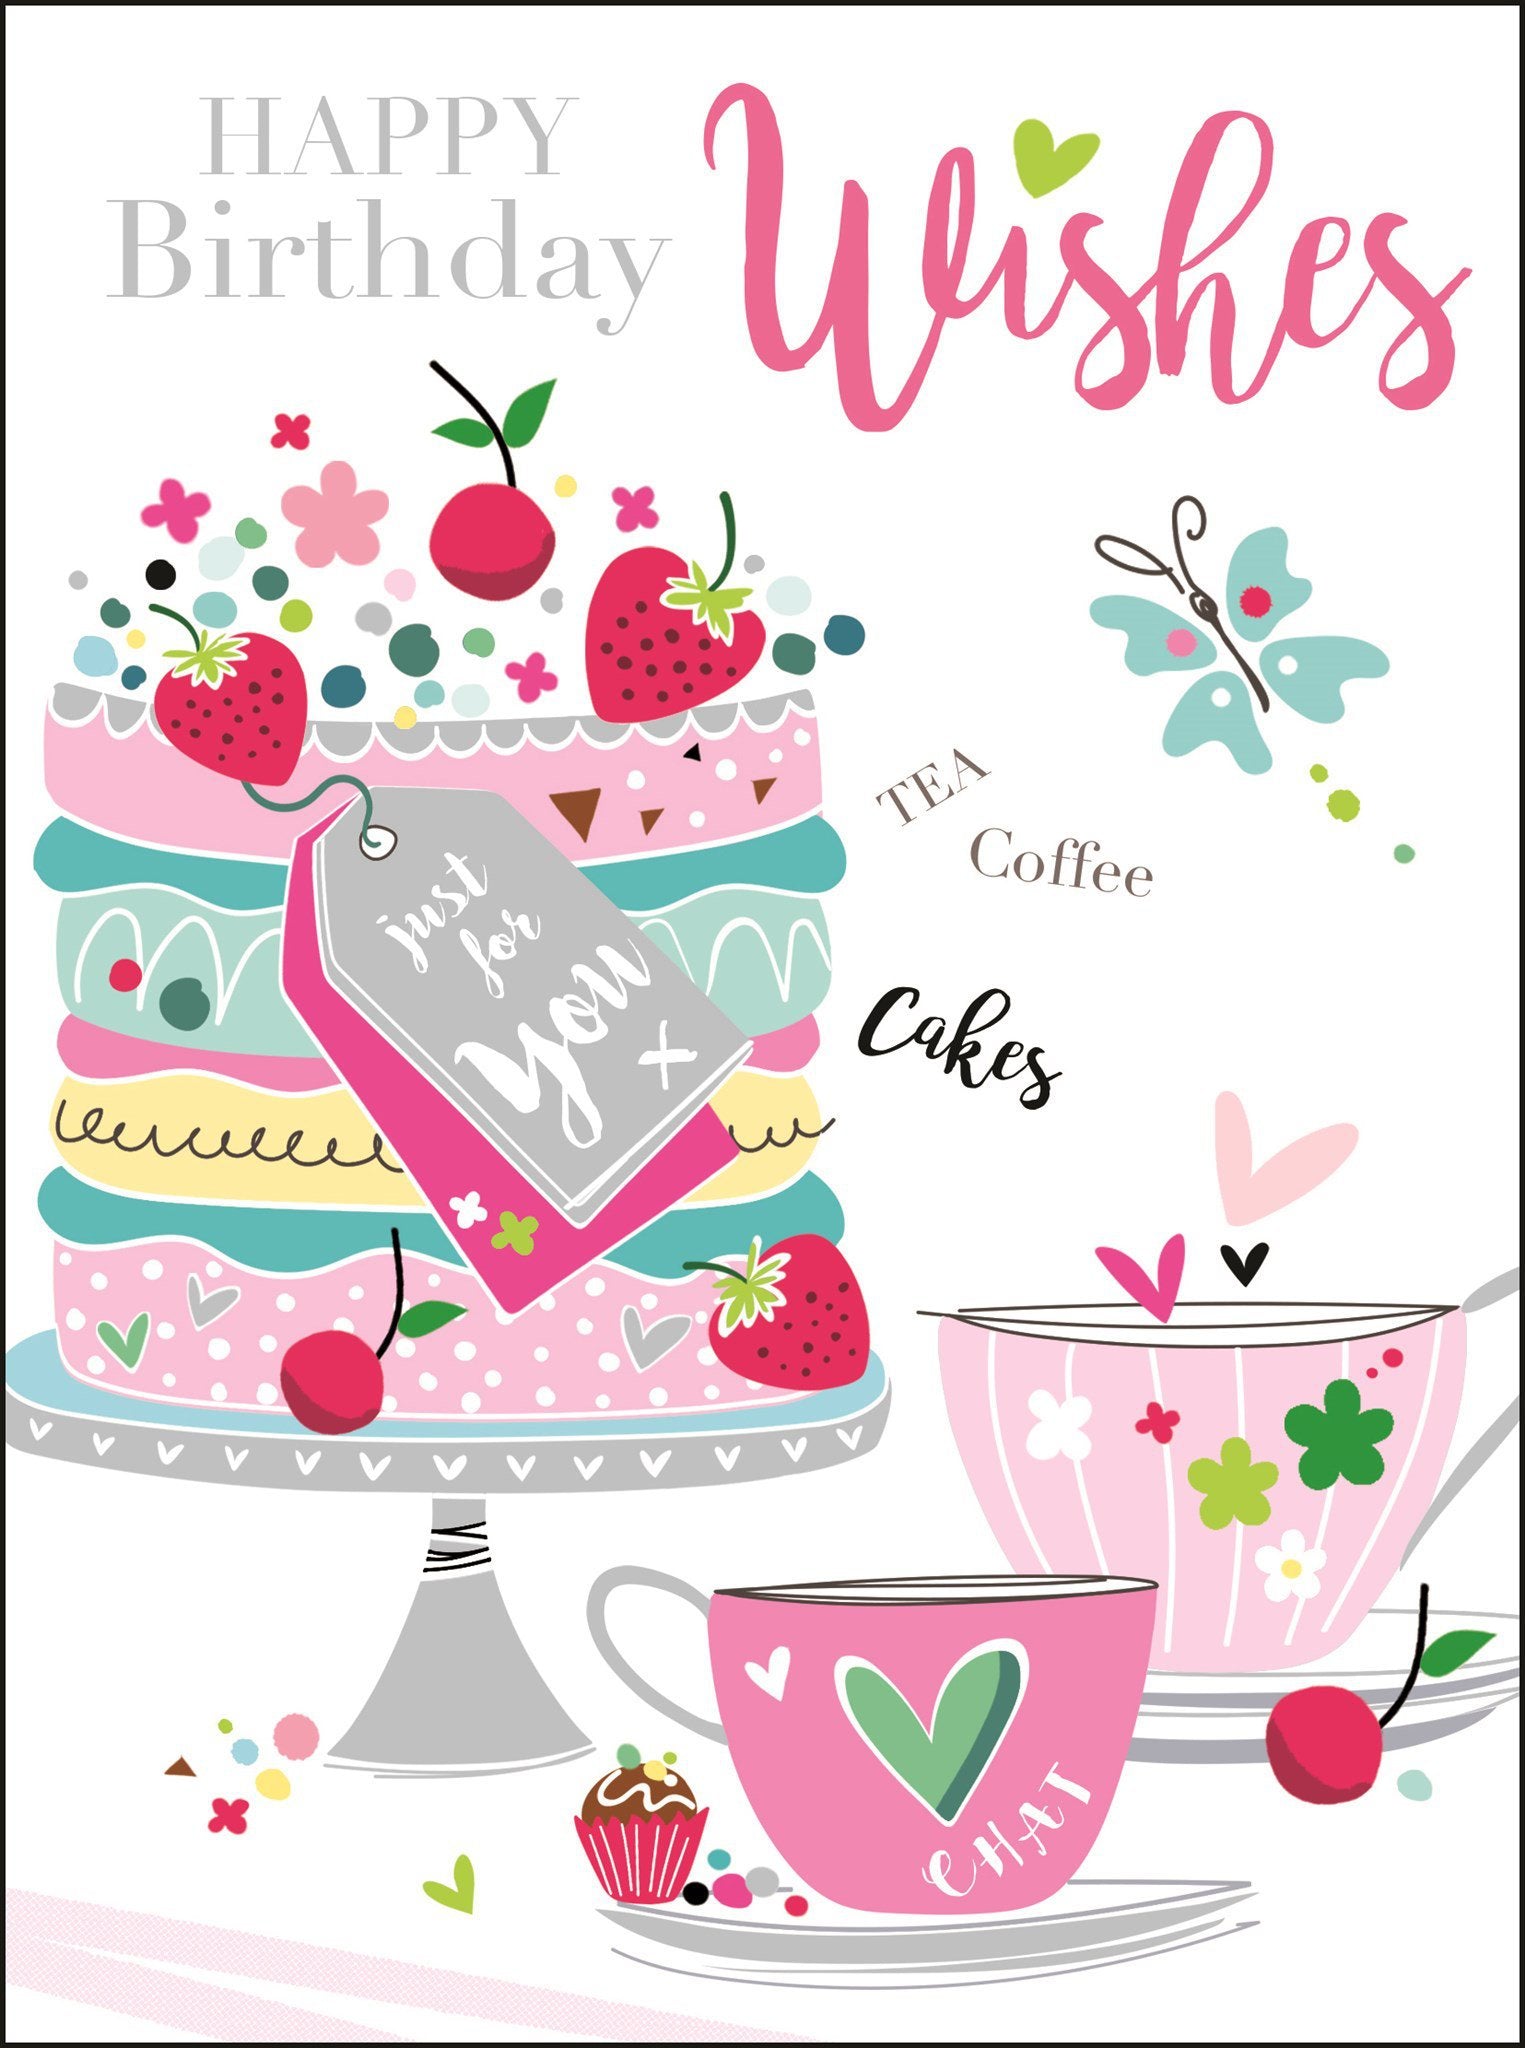 Front of Open Female Birthday Cake Greetings Card